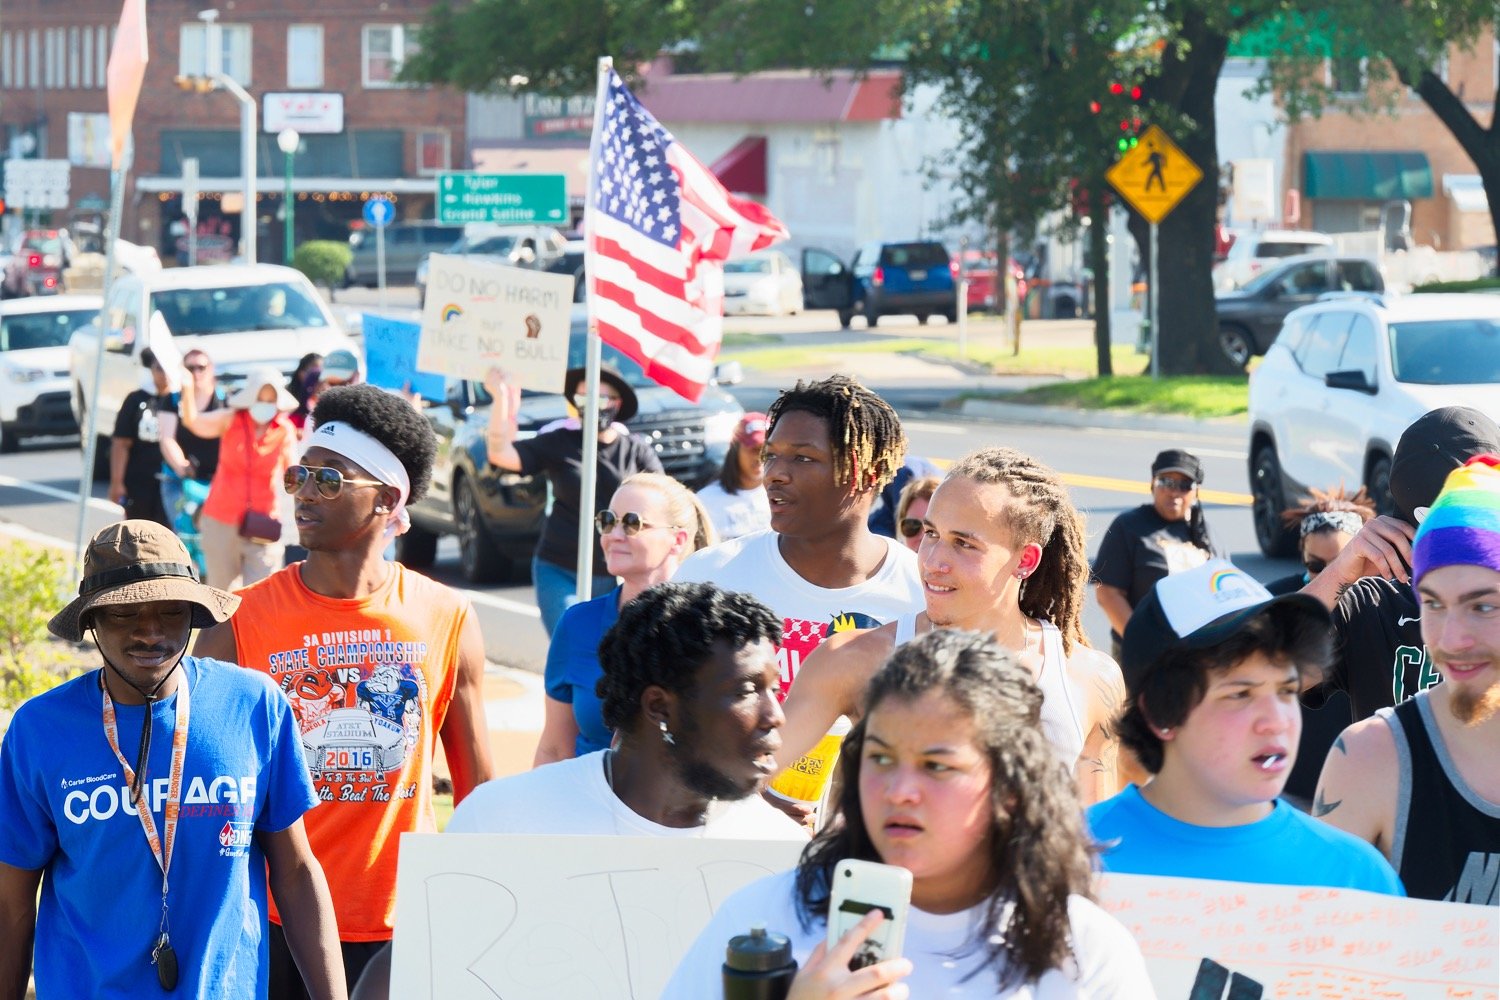 For the third straight week protesters took to the streets of Mineola, marching from the downtown gazebo along Pacific Ave. north to Loop 564 to draw attention to racial inequality.